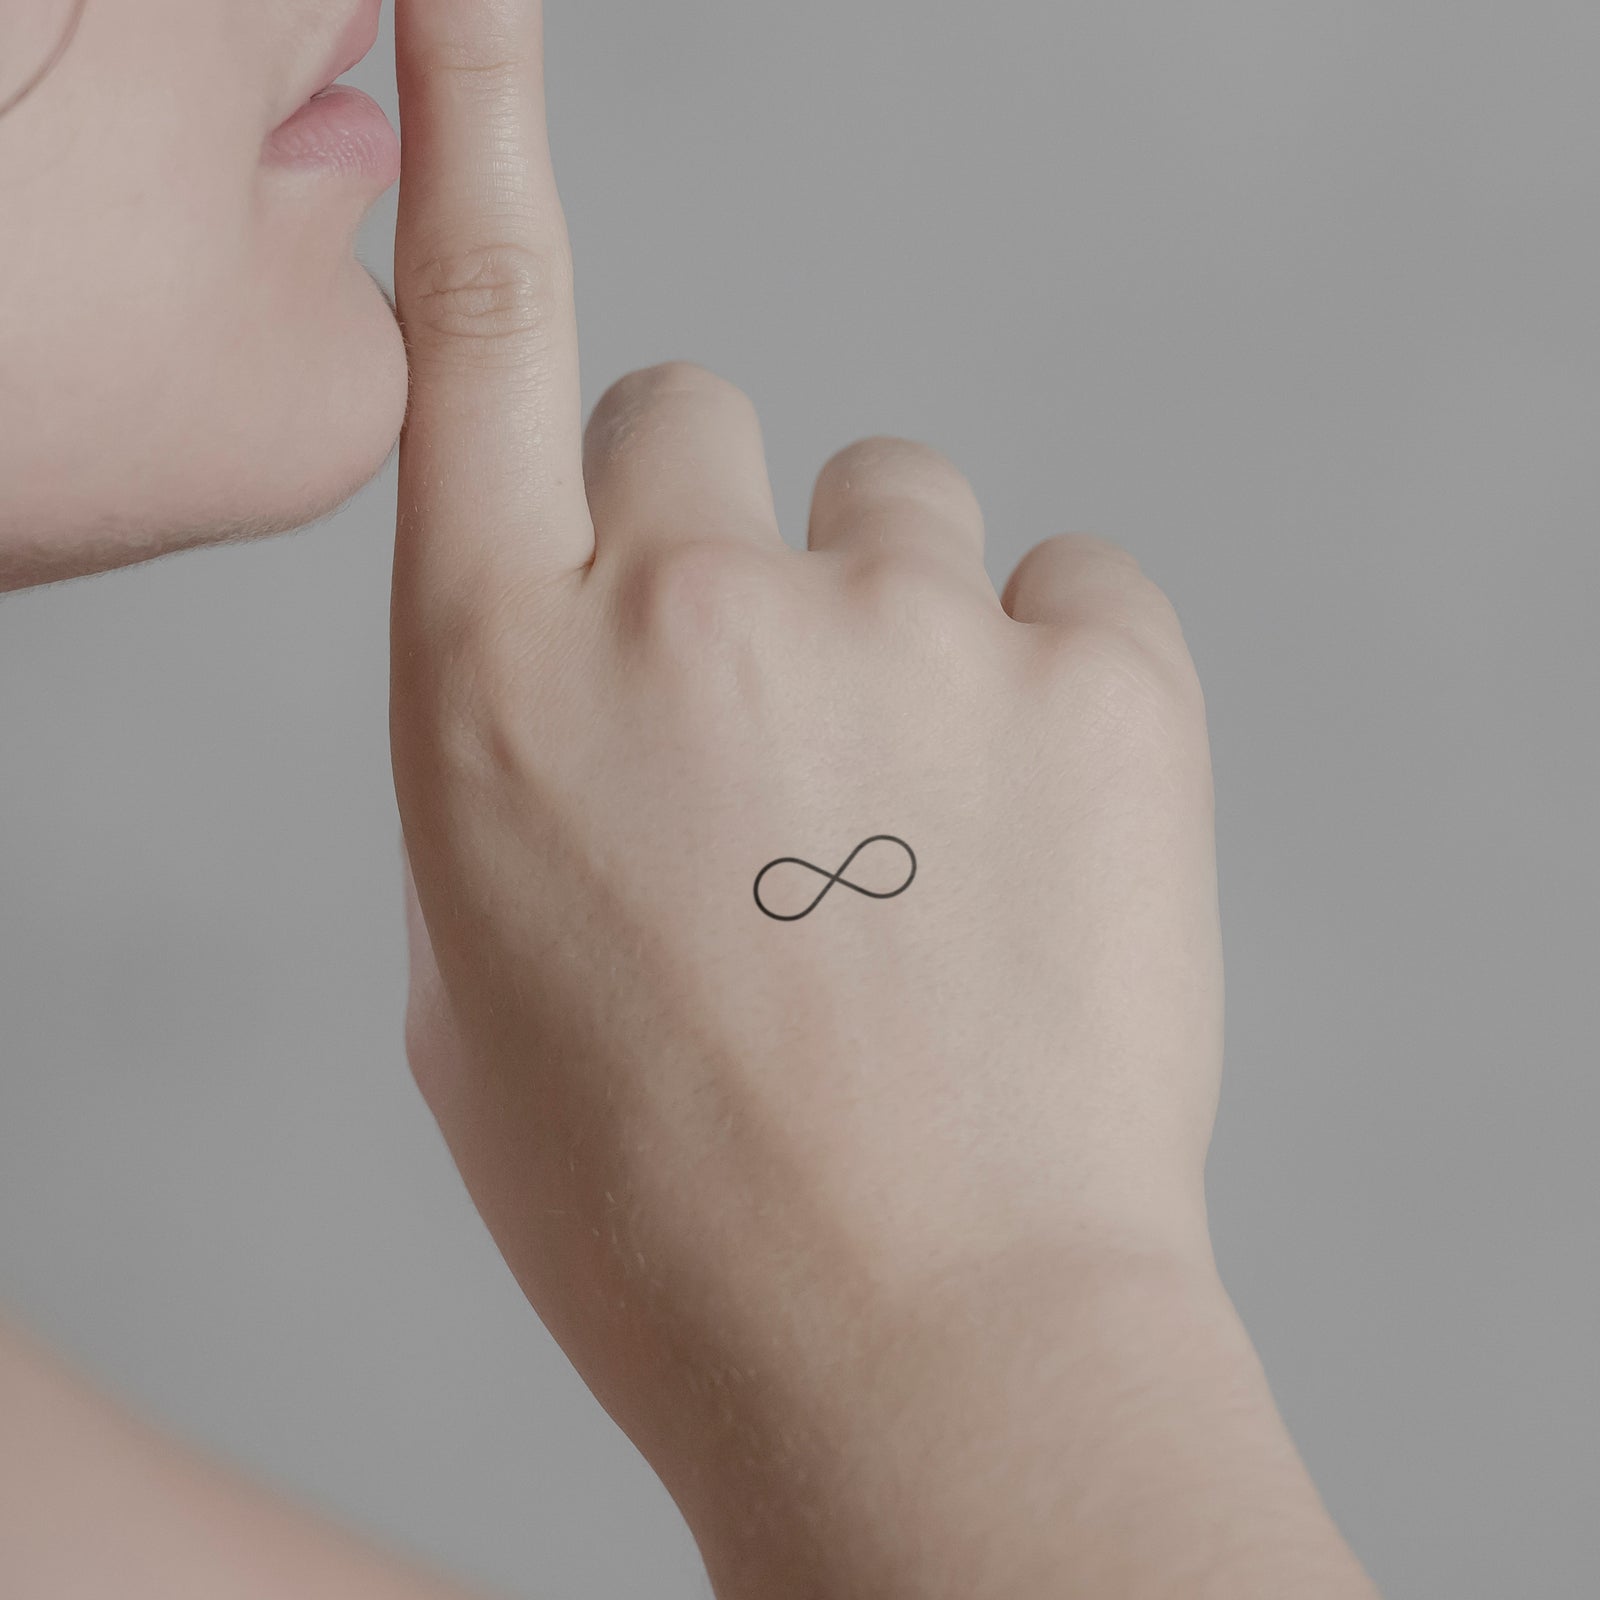 What to Know Before Going for Your First Tattoo